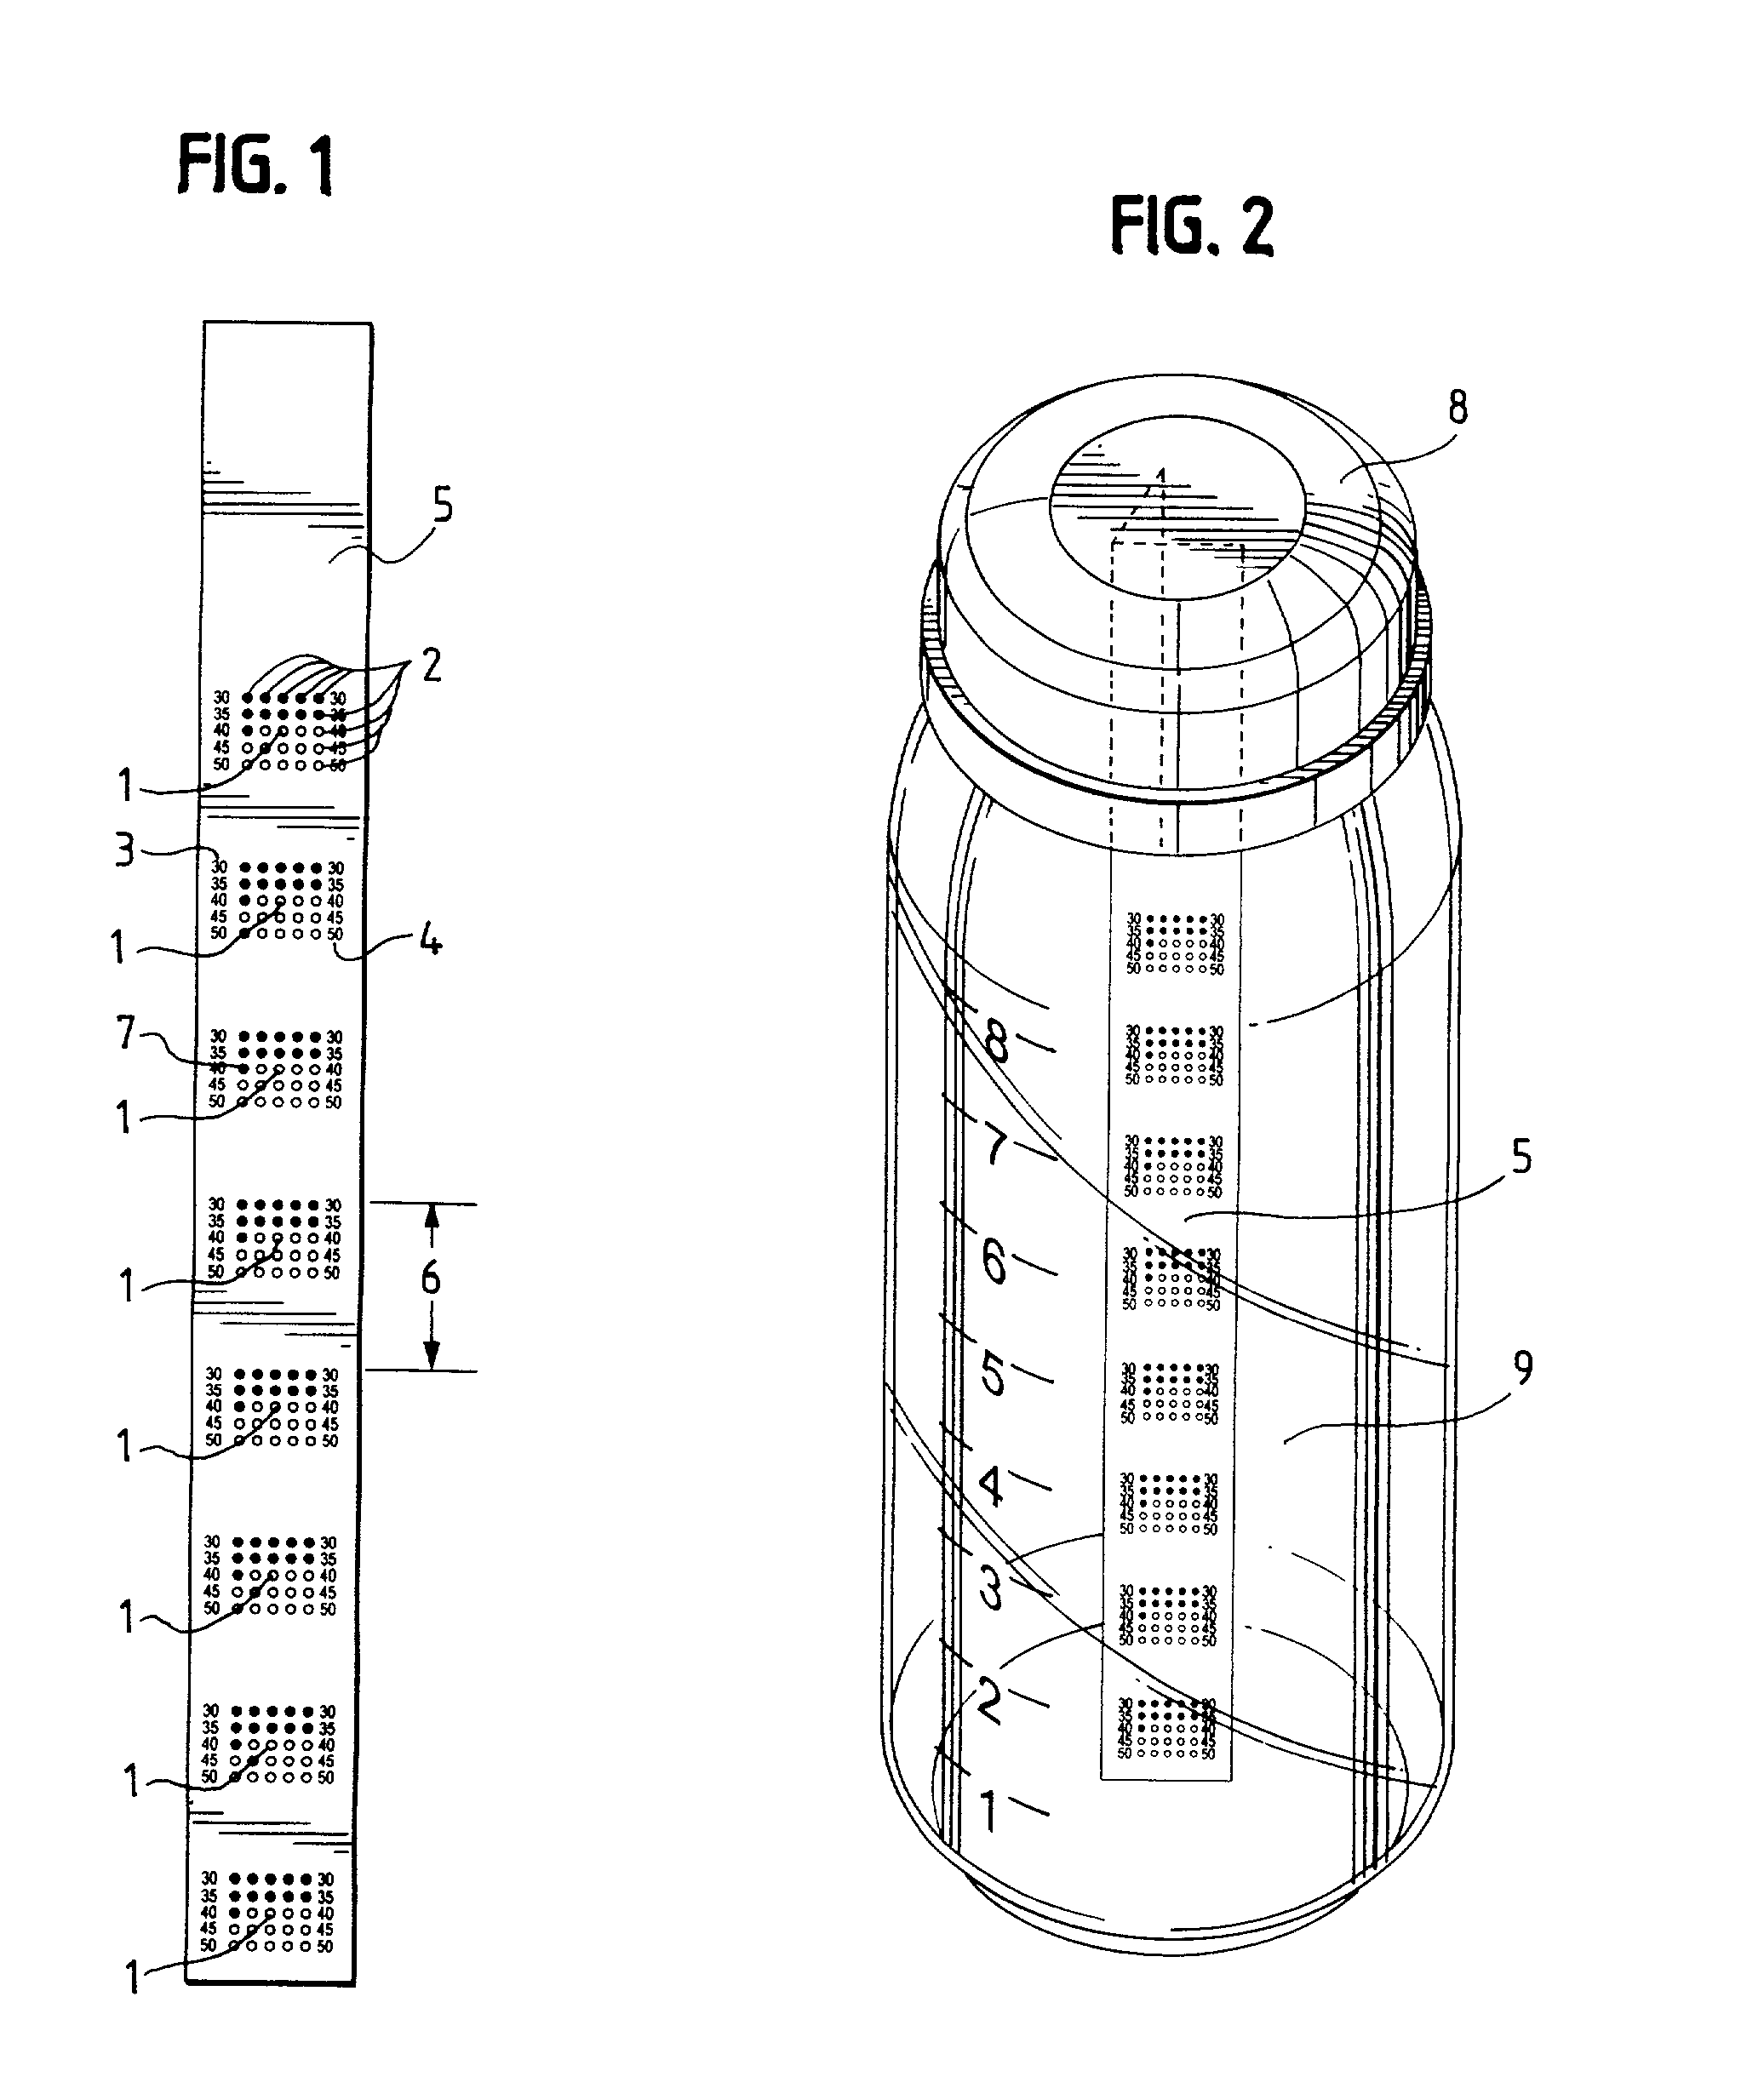 Shielding method for microwave heating of infant formula to a safe and uniform temperature